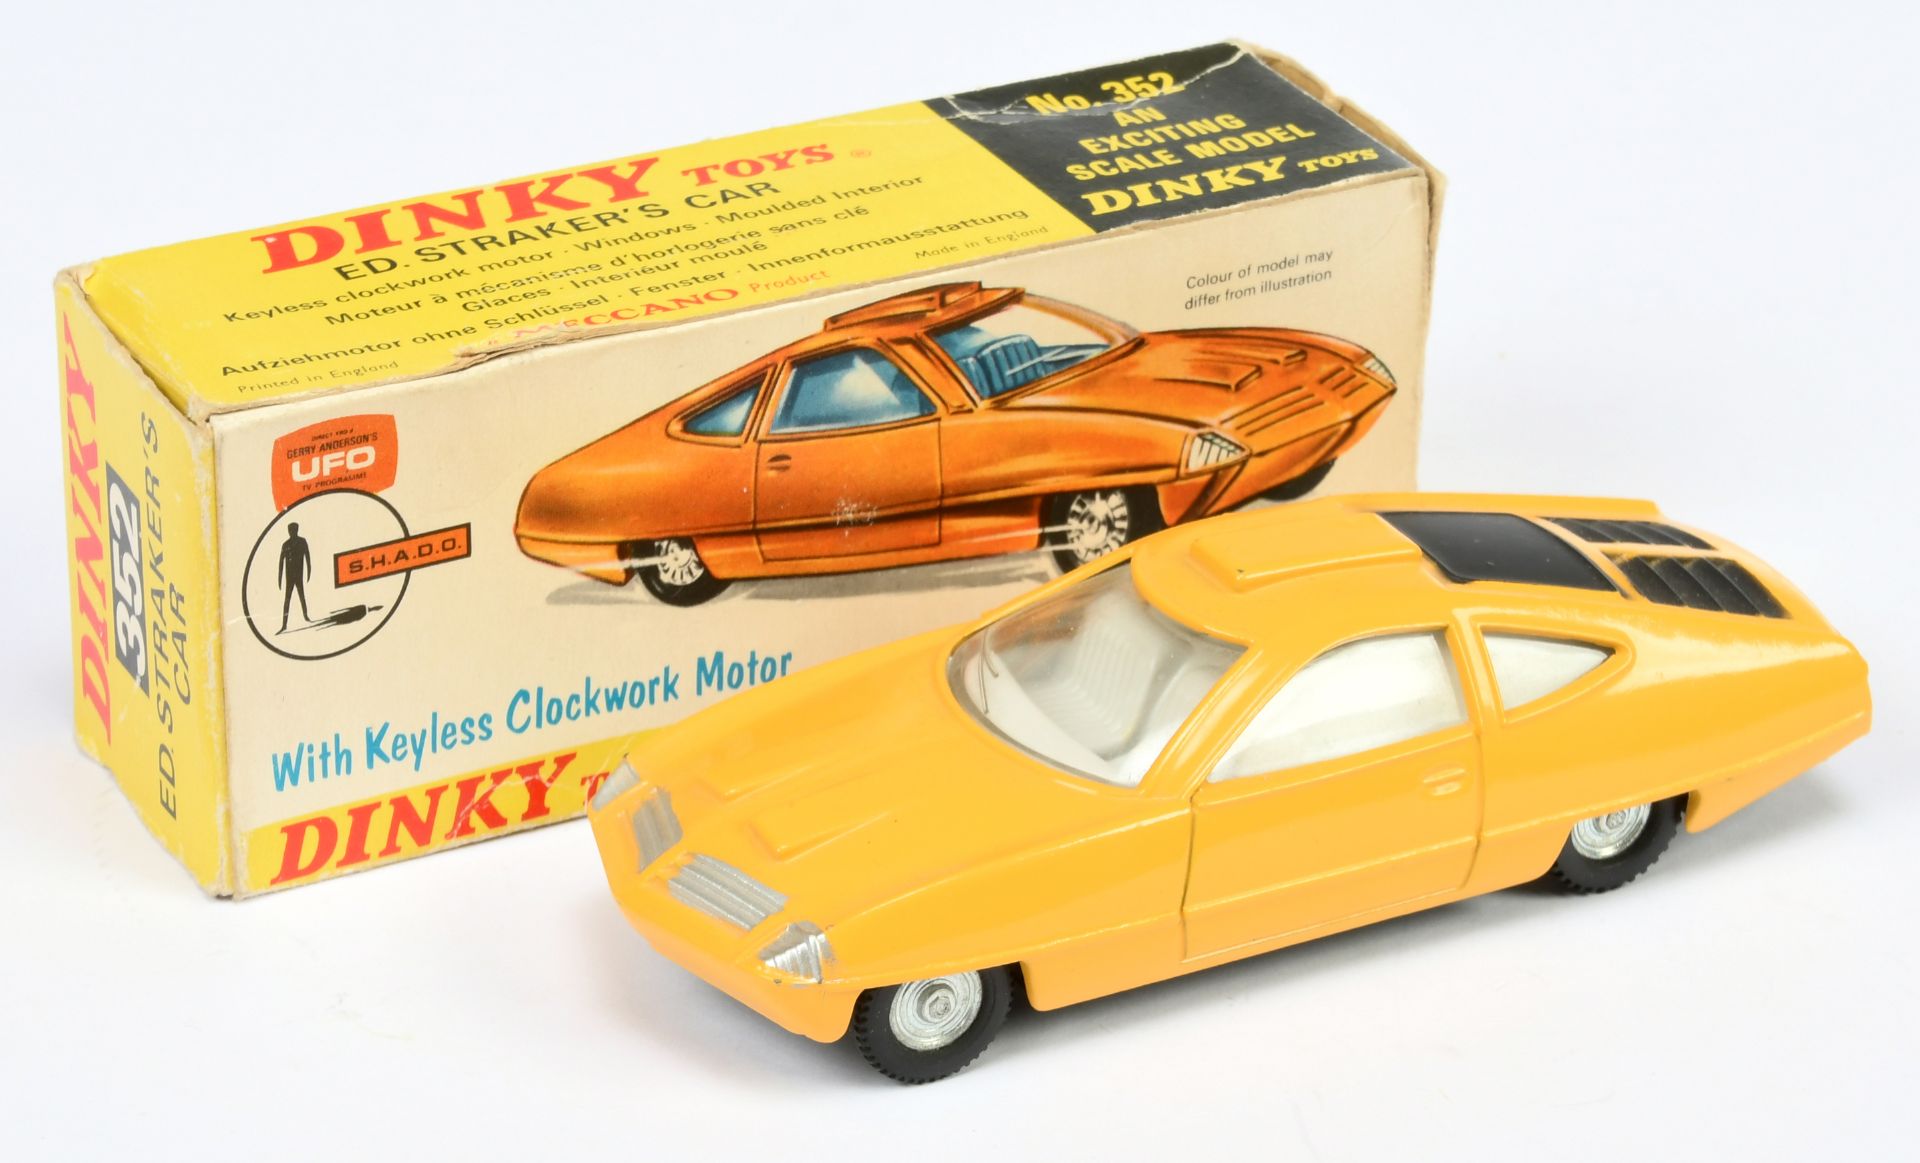 Dinky Toys 352 "UFO" Ed Strakers Car  - Yellow body, black engine covers, pale grey interior, sil...